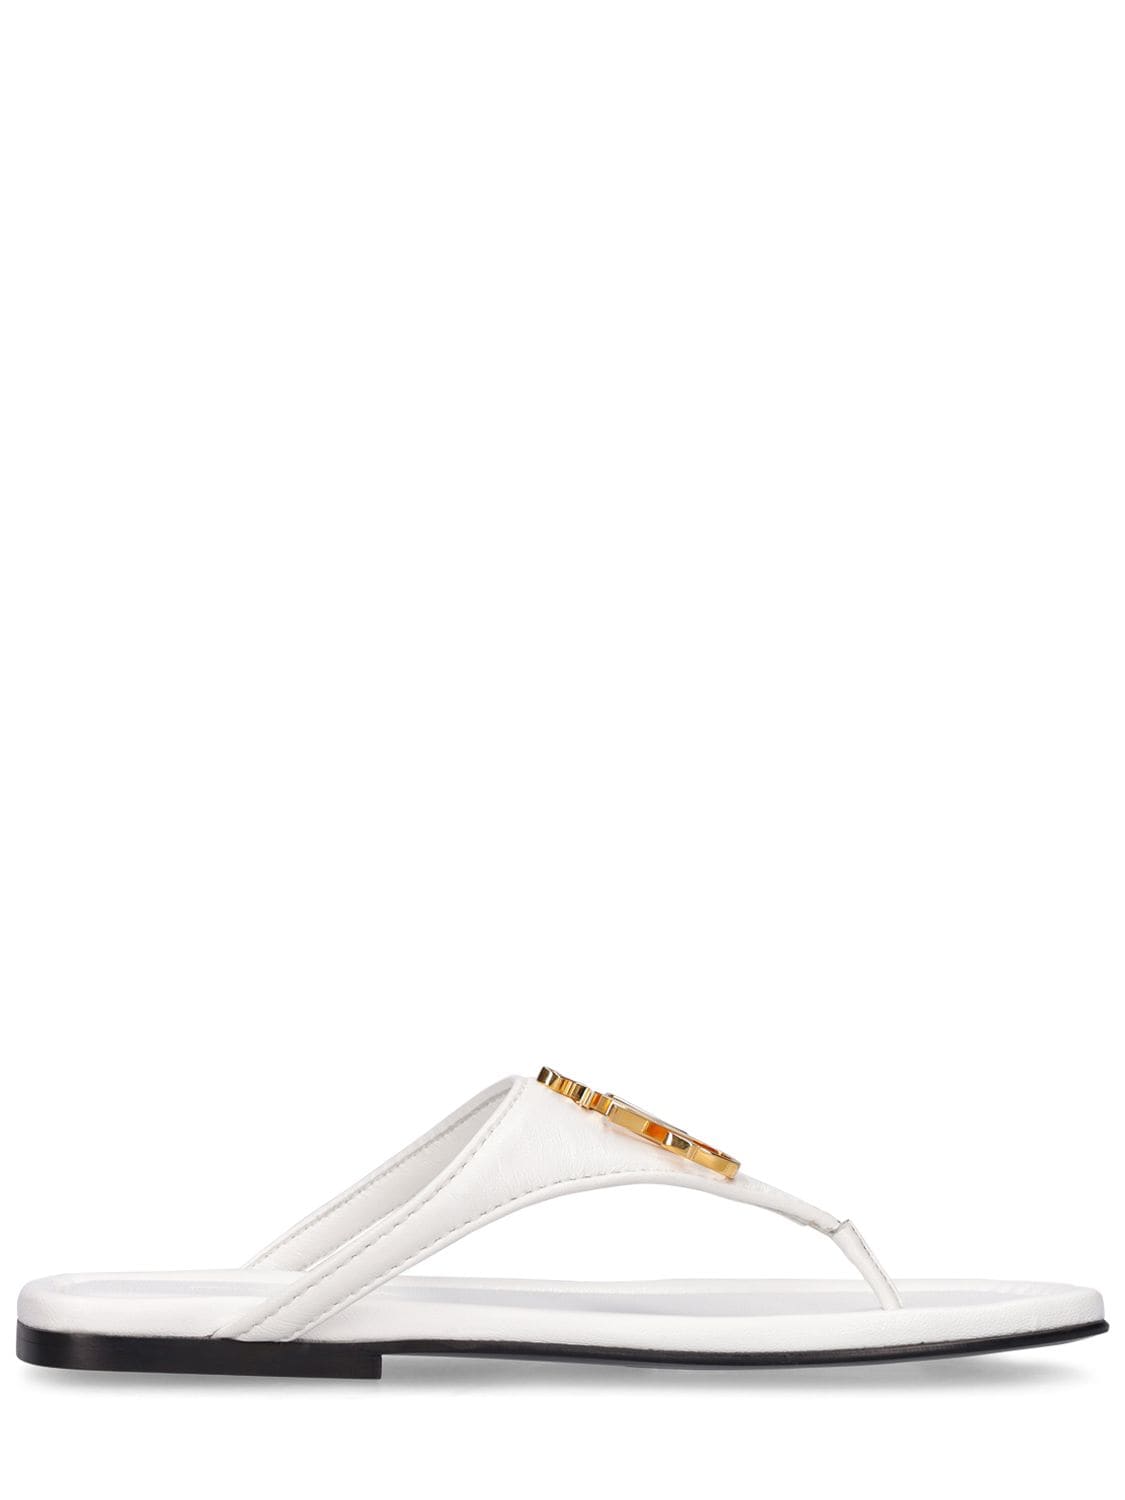 Mm Anchor Leather Thong Sandals - JW ANDERSON - Modalova